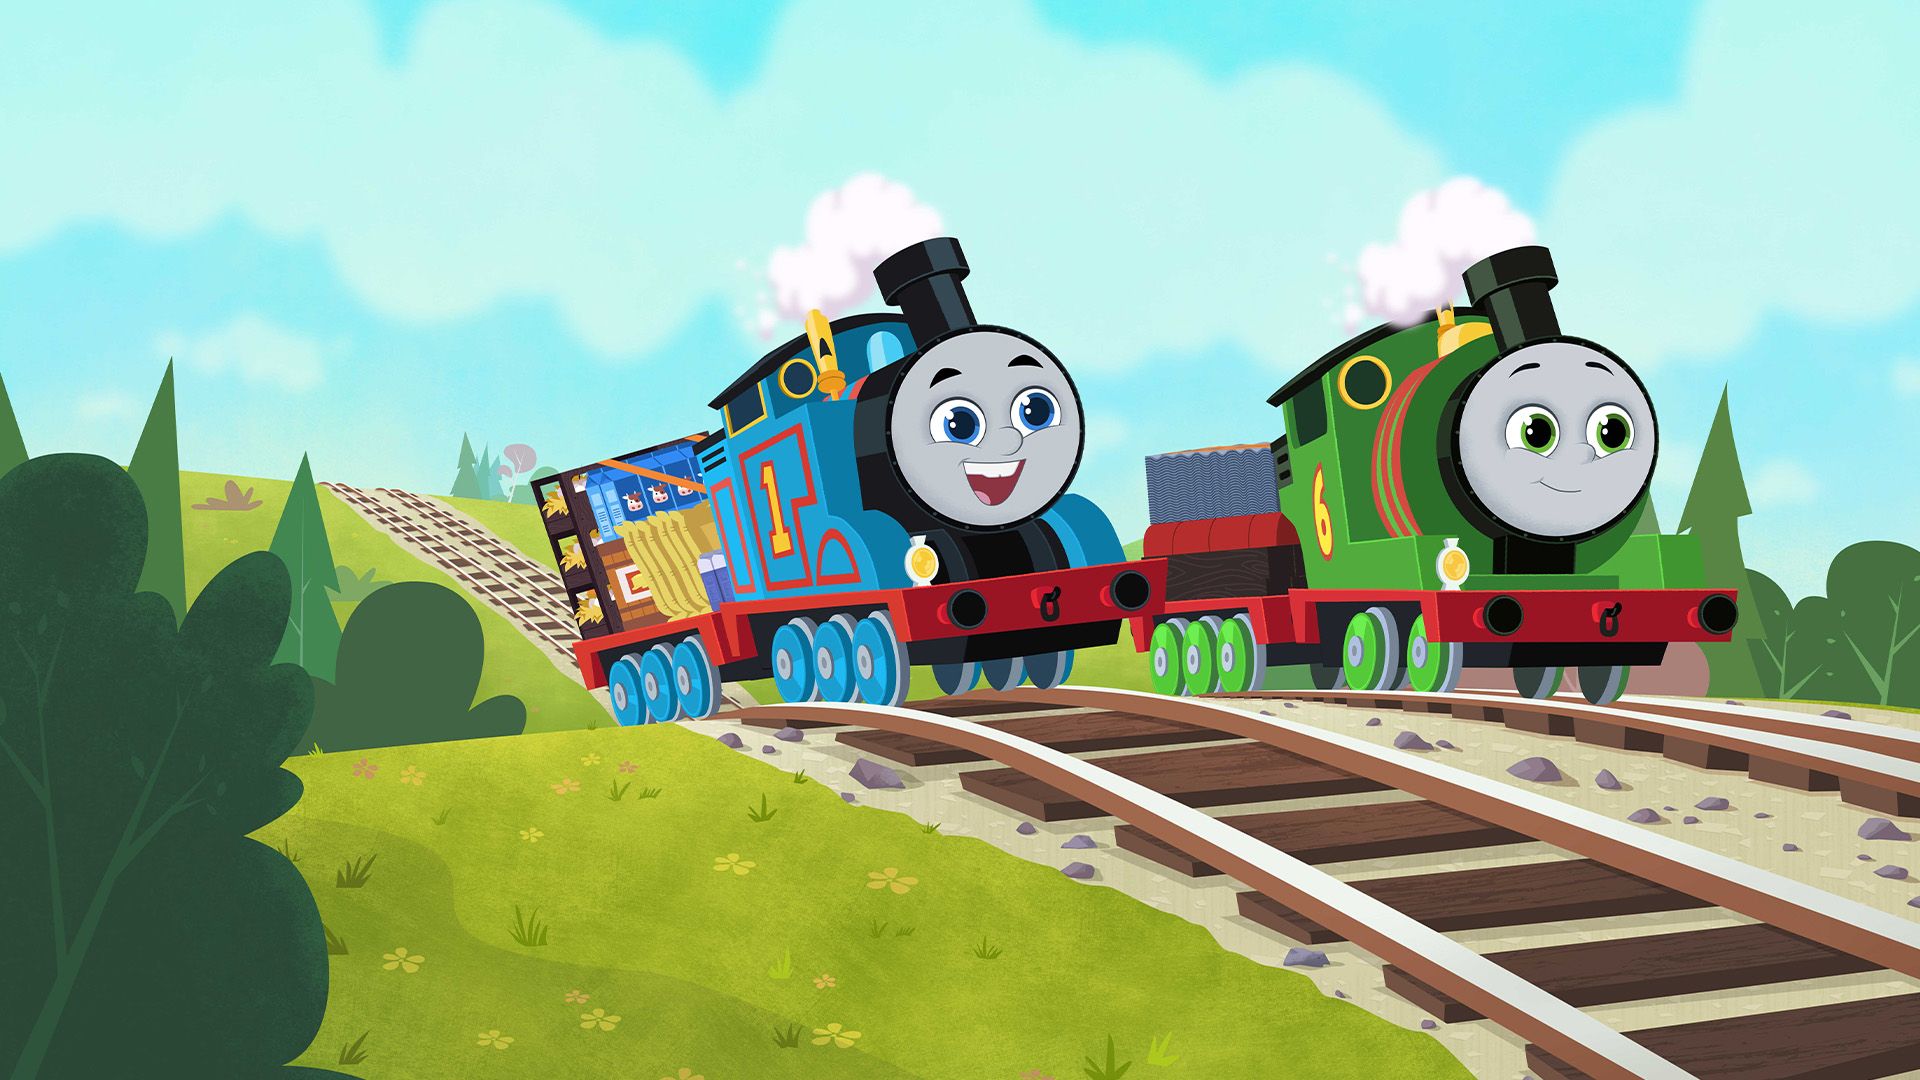 Thomas and Percy's Eggsellent Adventure. Thomas & Friends: All Engines Go